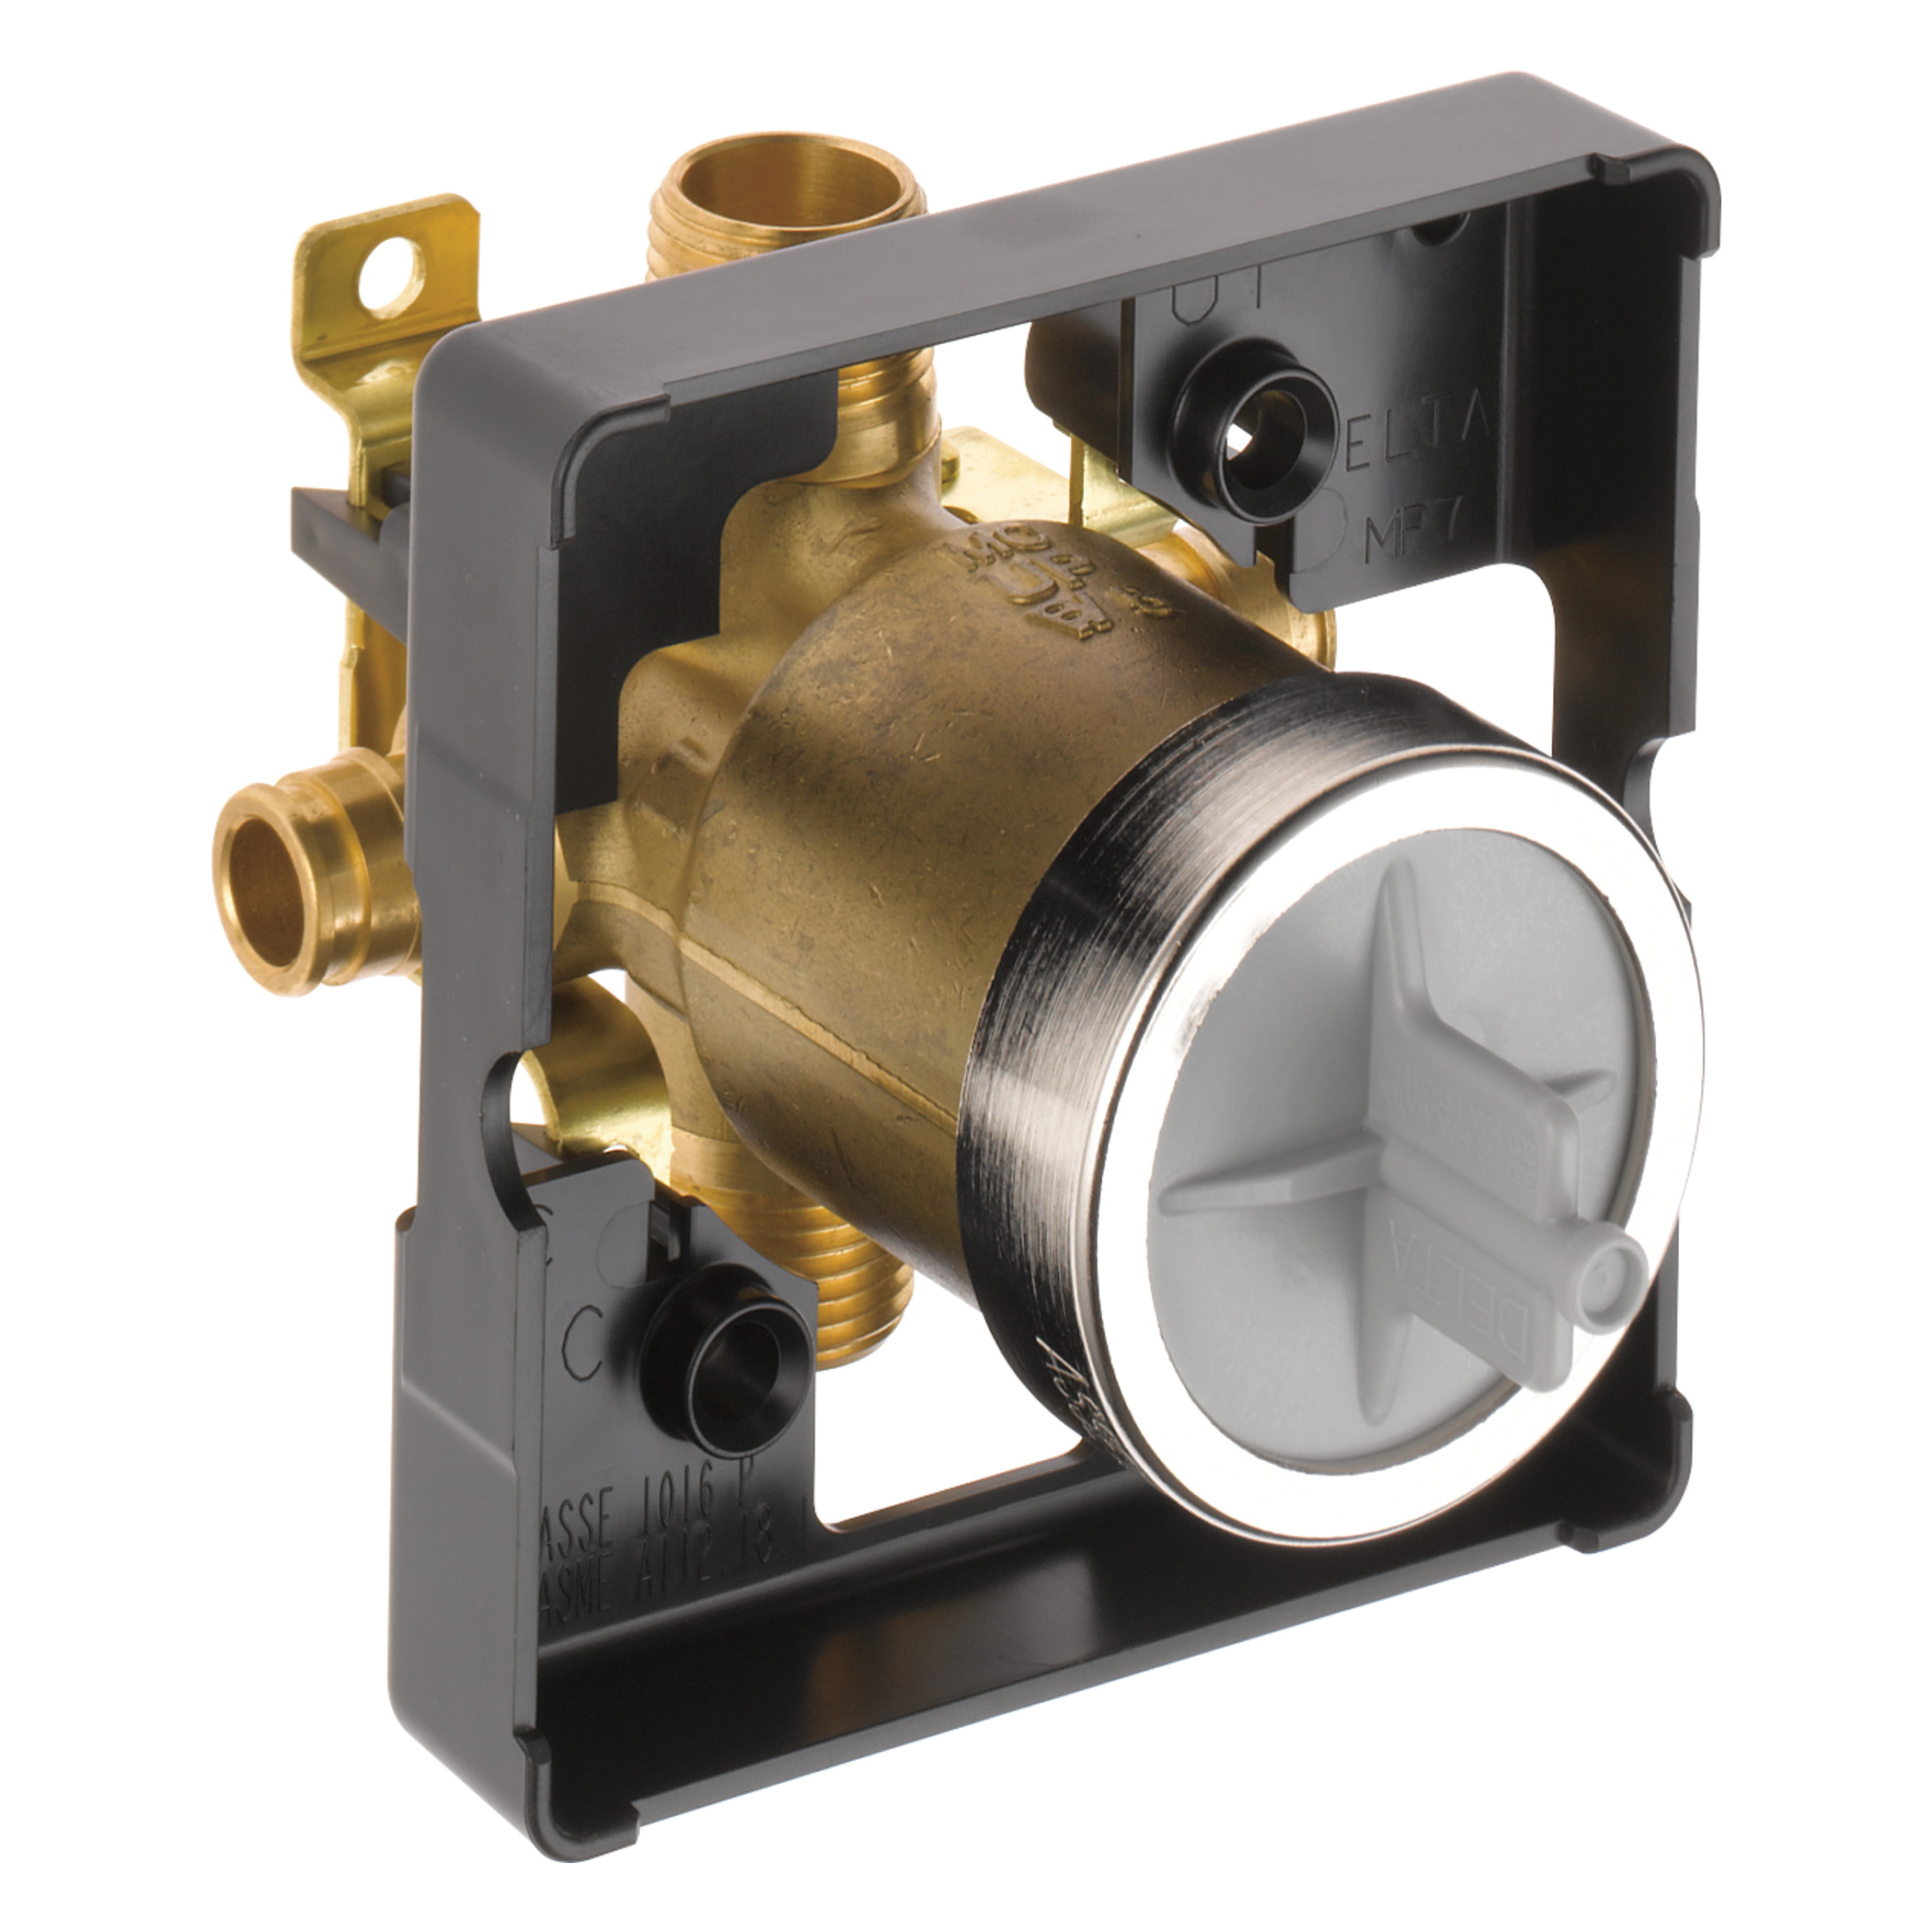 DELTA® R10000-MF Universal Tub and Shower Rough-In Valve Body, 1/2 in Cold Expansion PEX Inlet x 1/2 in Pex Cold Expansion Outlet, Forged Brass Body, Domestic